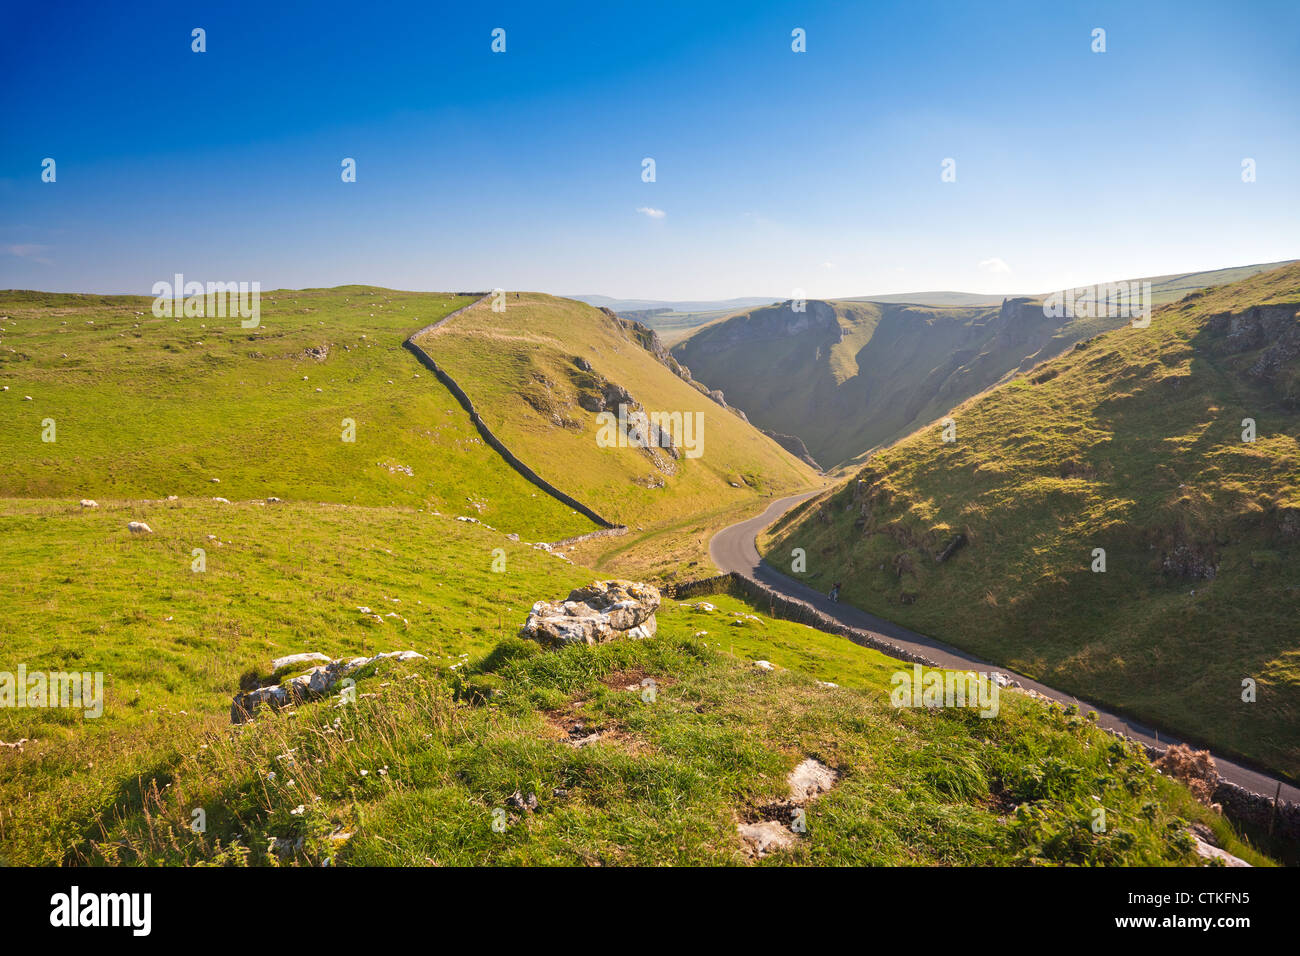 Looking east down Winnats Pass - a limestone gorge - in the Peak District National Park Derbyshire England UK Stock Photo